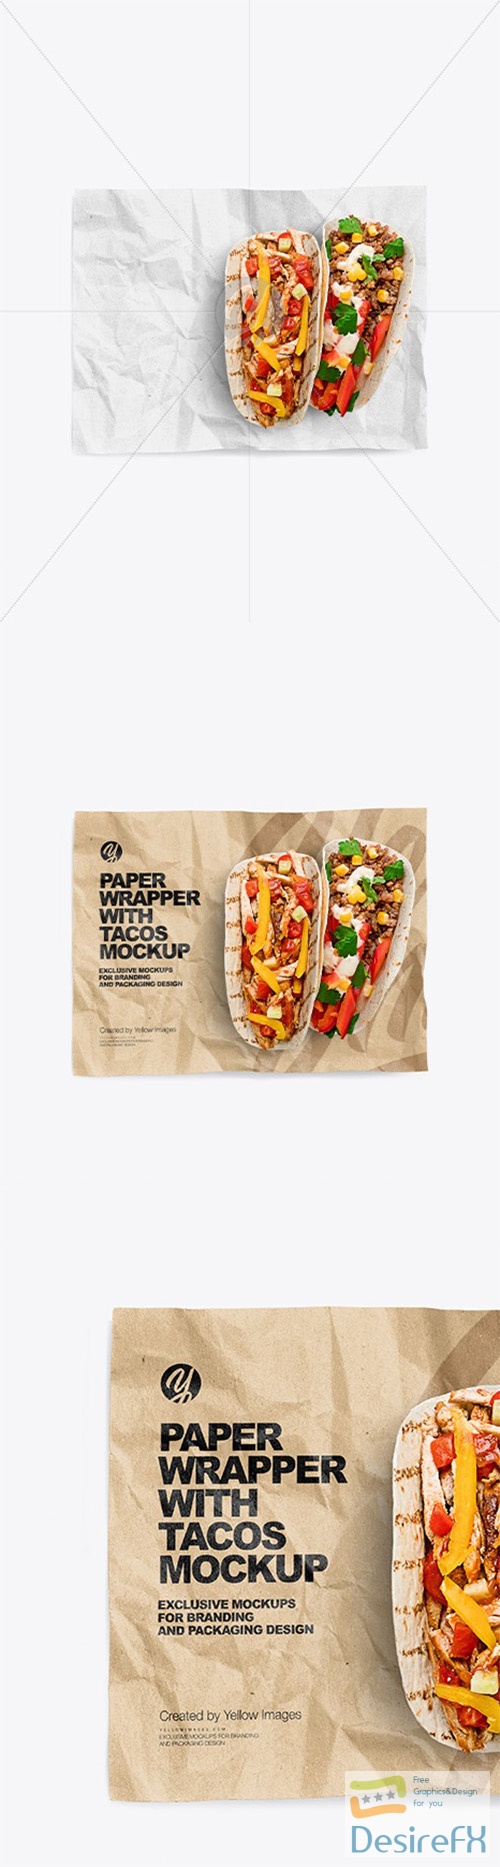 Paper Wrapper With Tacos Mockup 96469